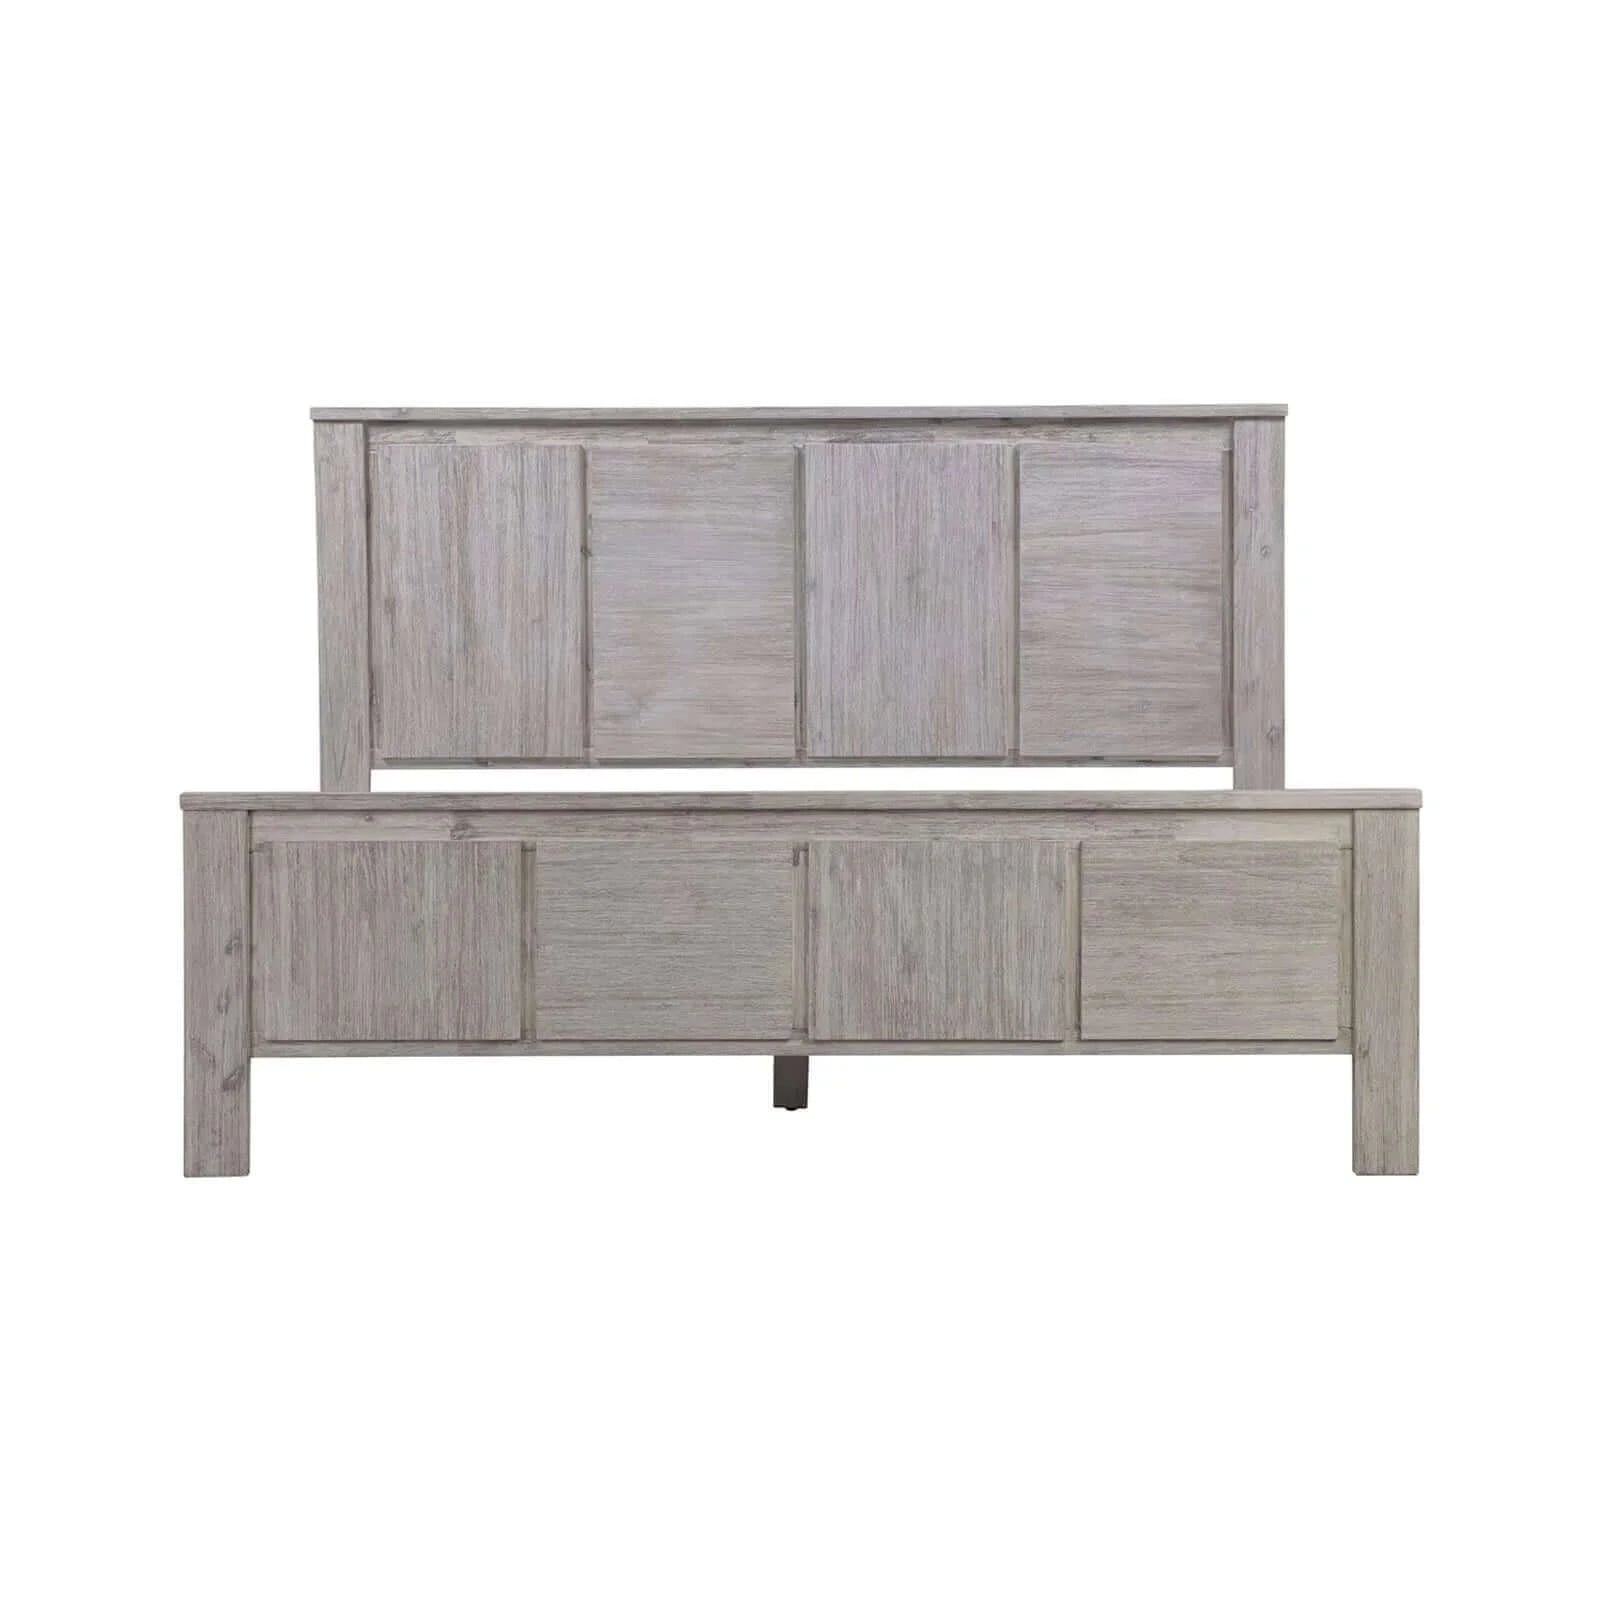 Buy 3 Pieces Bedroom Suite with Solid Acacia Wood Veneered Construction in King Size -Upinteriors